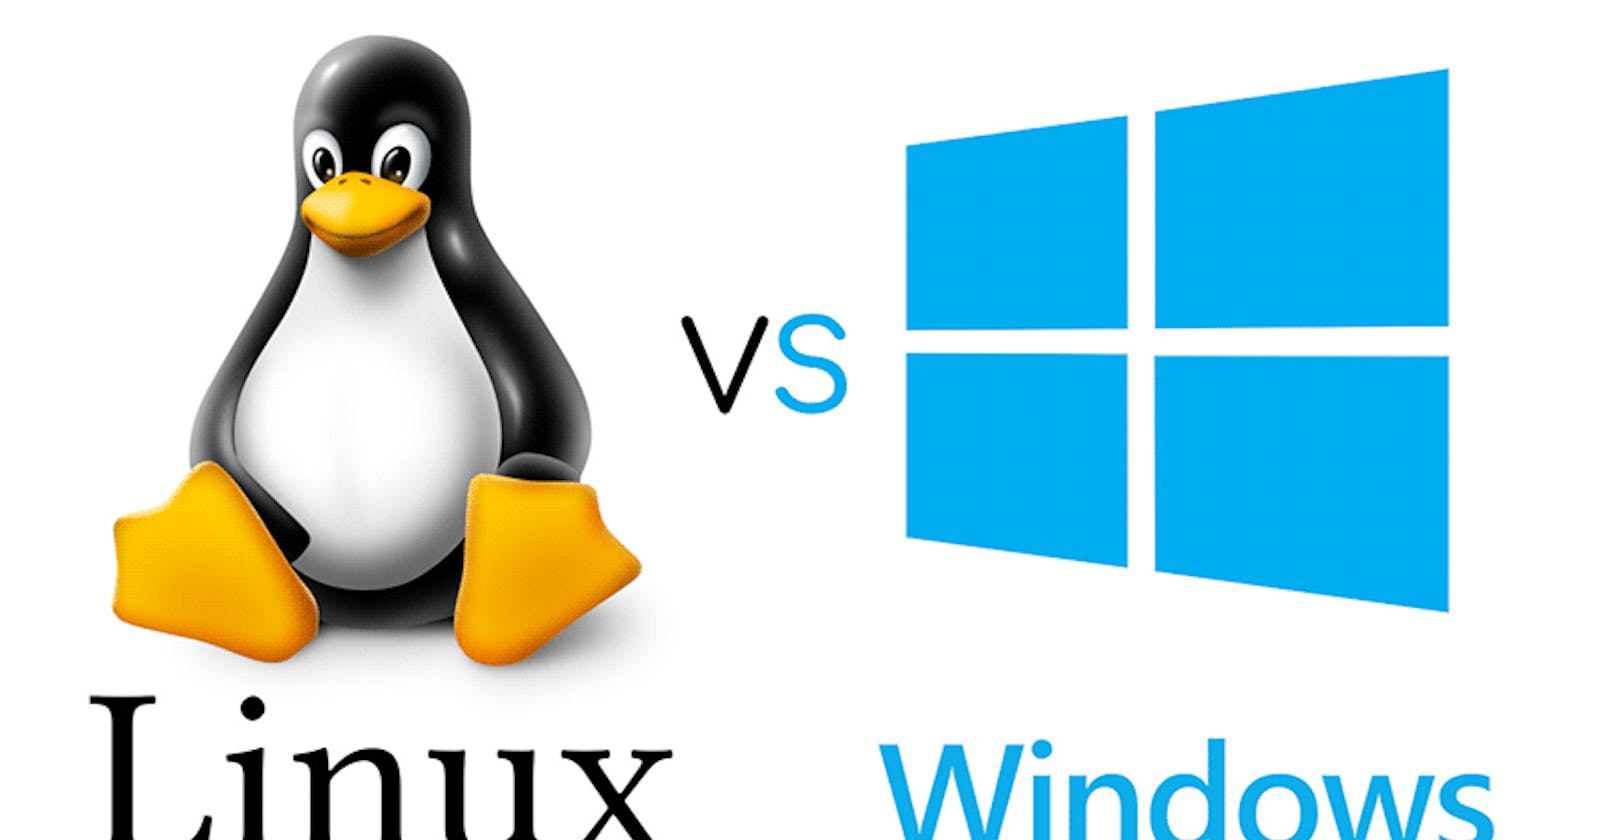 You need to Die that Linux vs Windows Argument